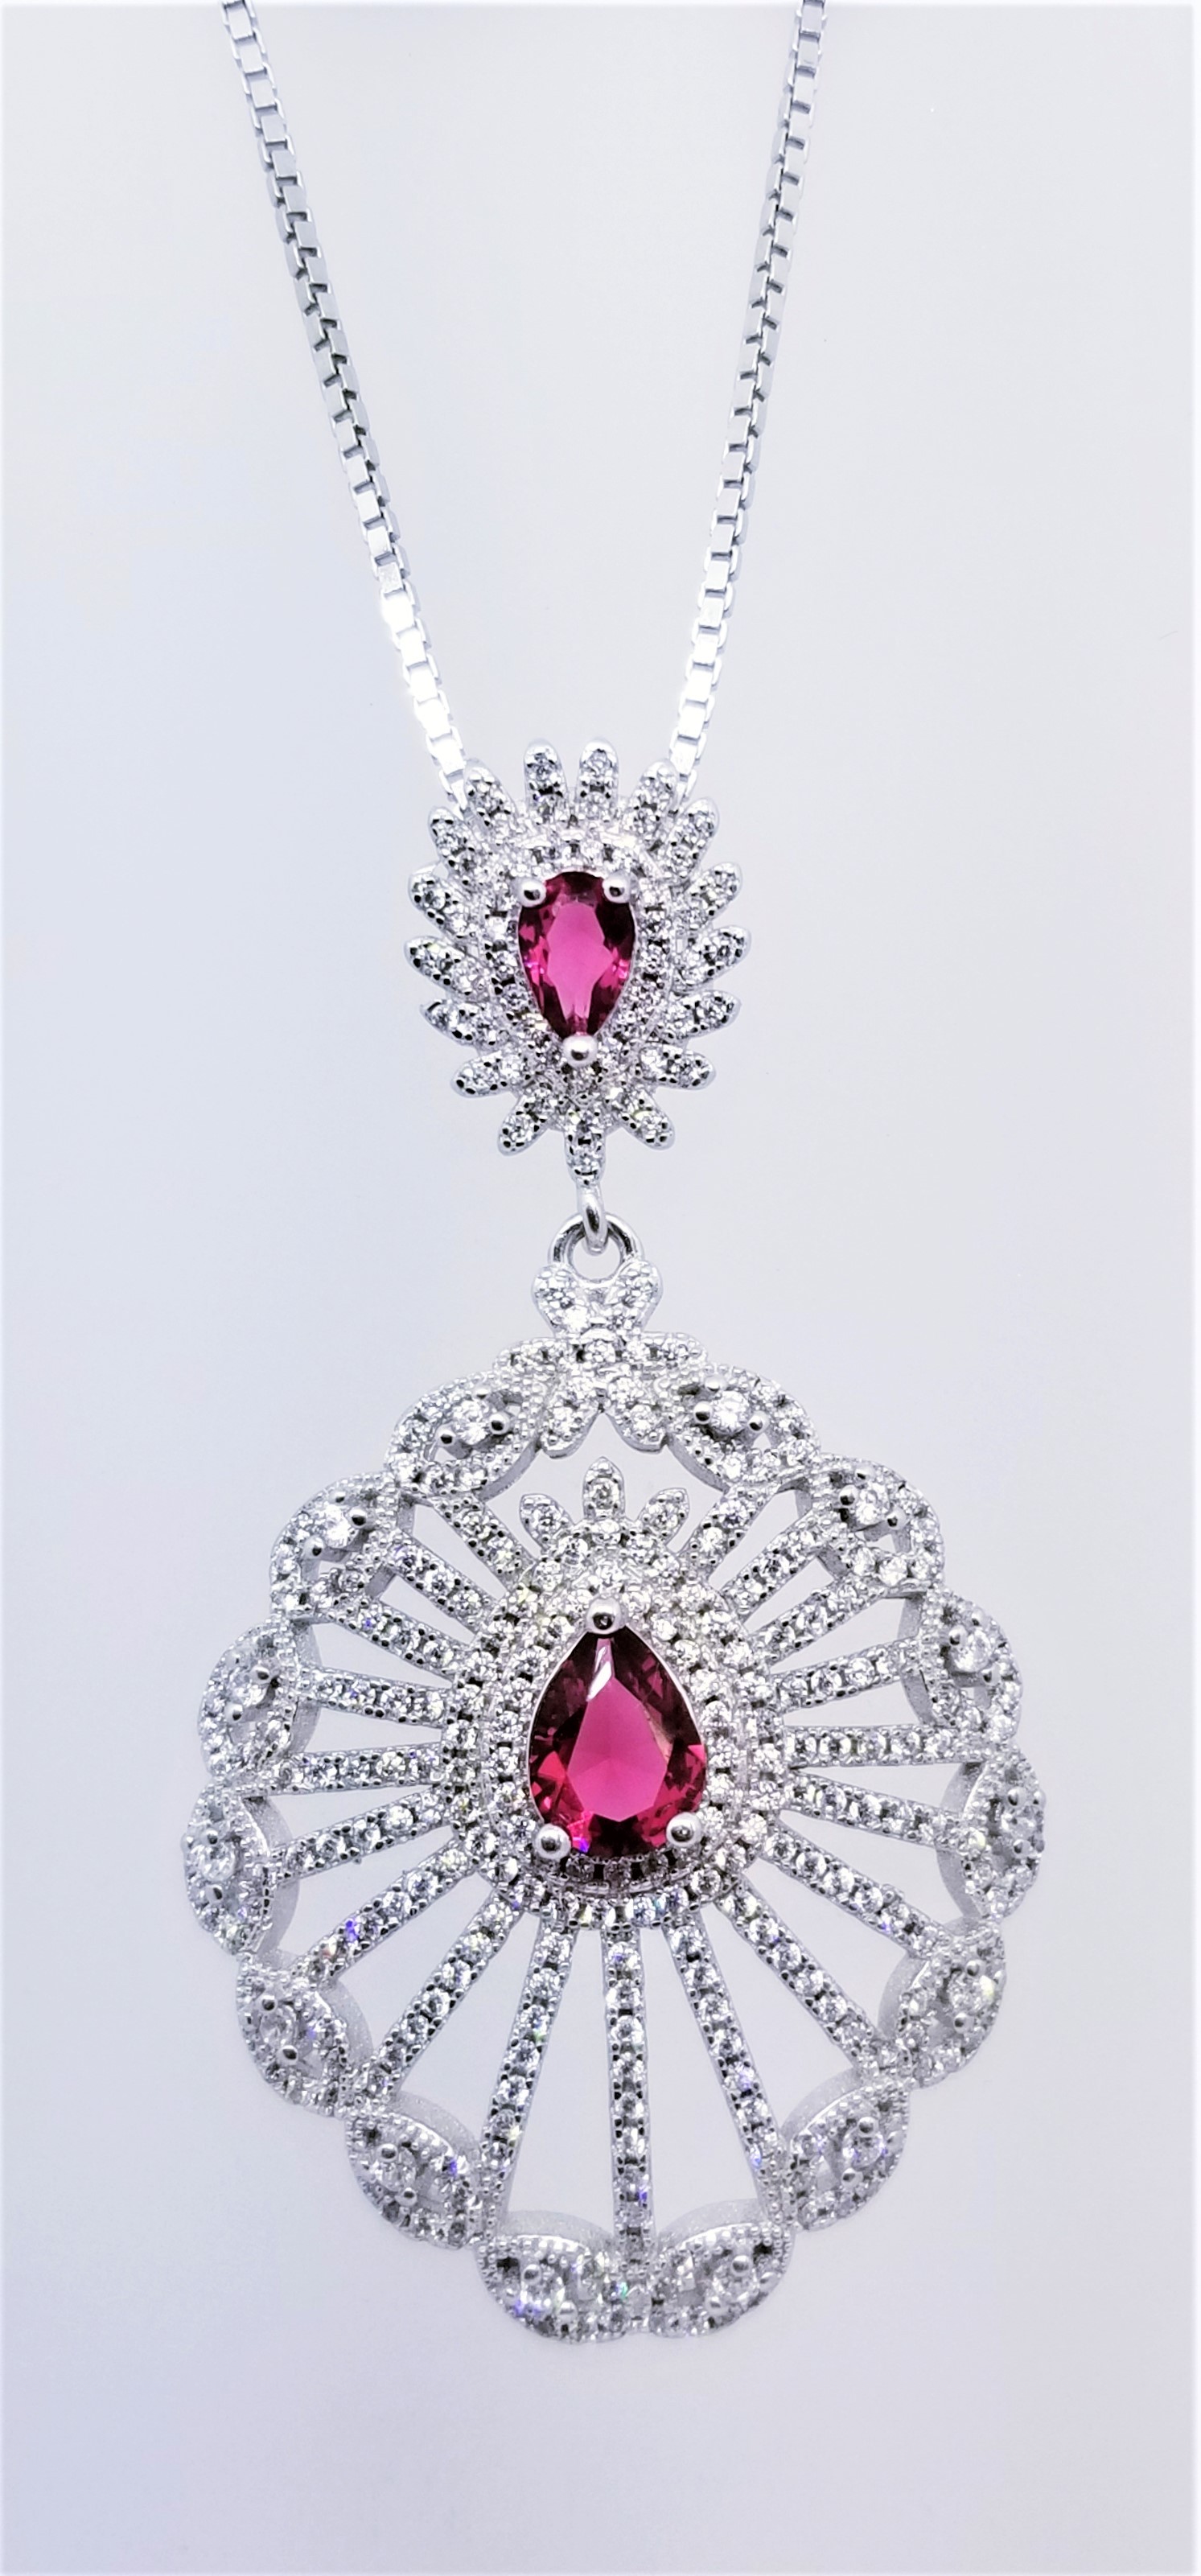 925 Sterling Silver Rhodium Tone Pendant With Ruby And CZ Stones 